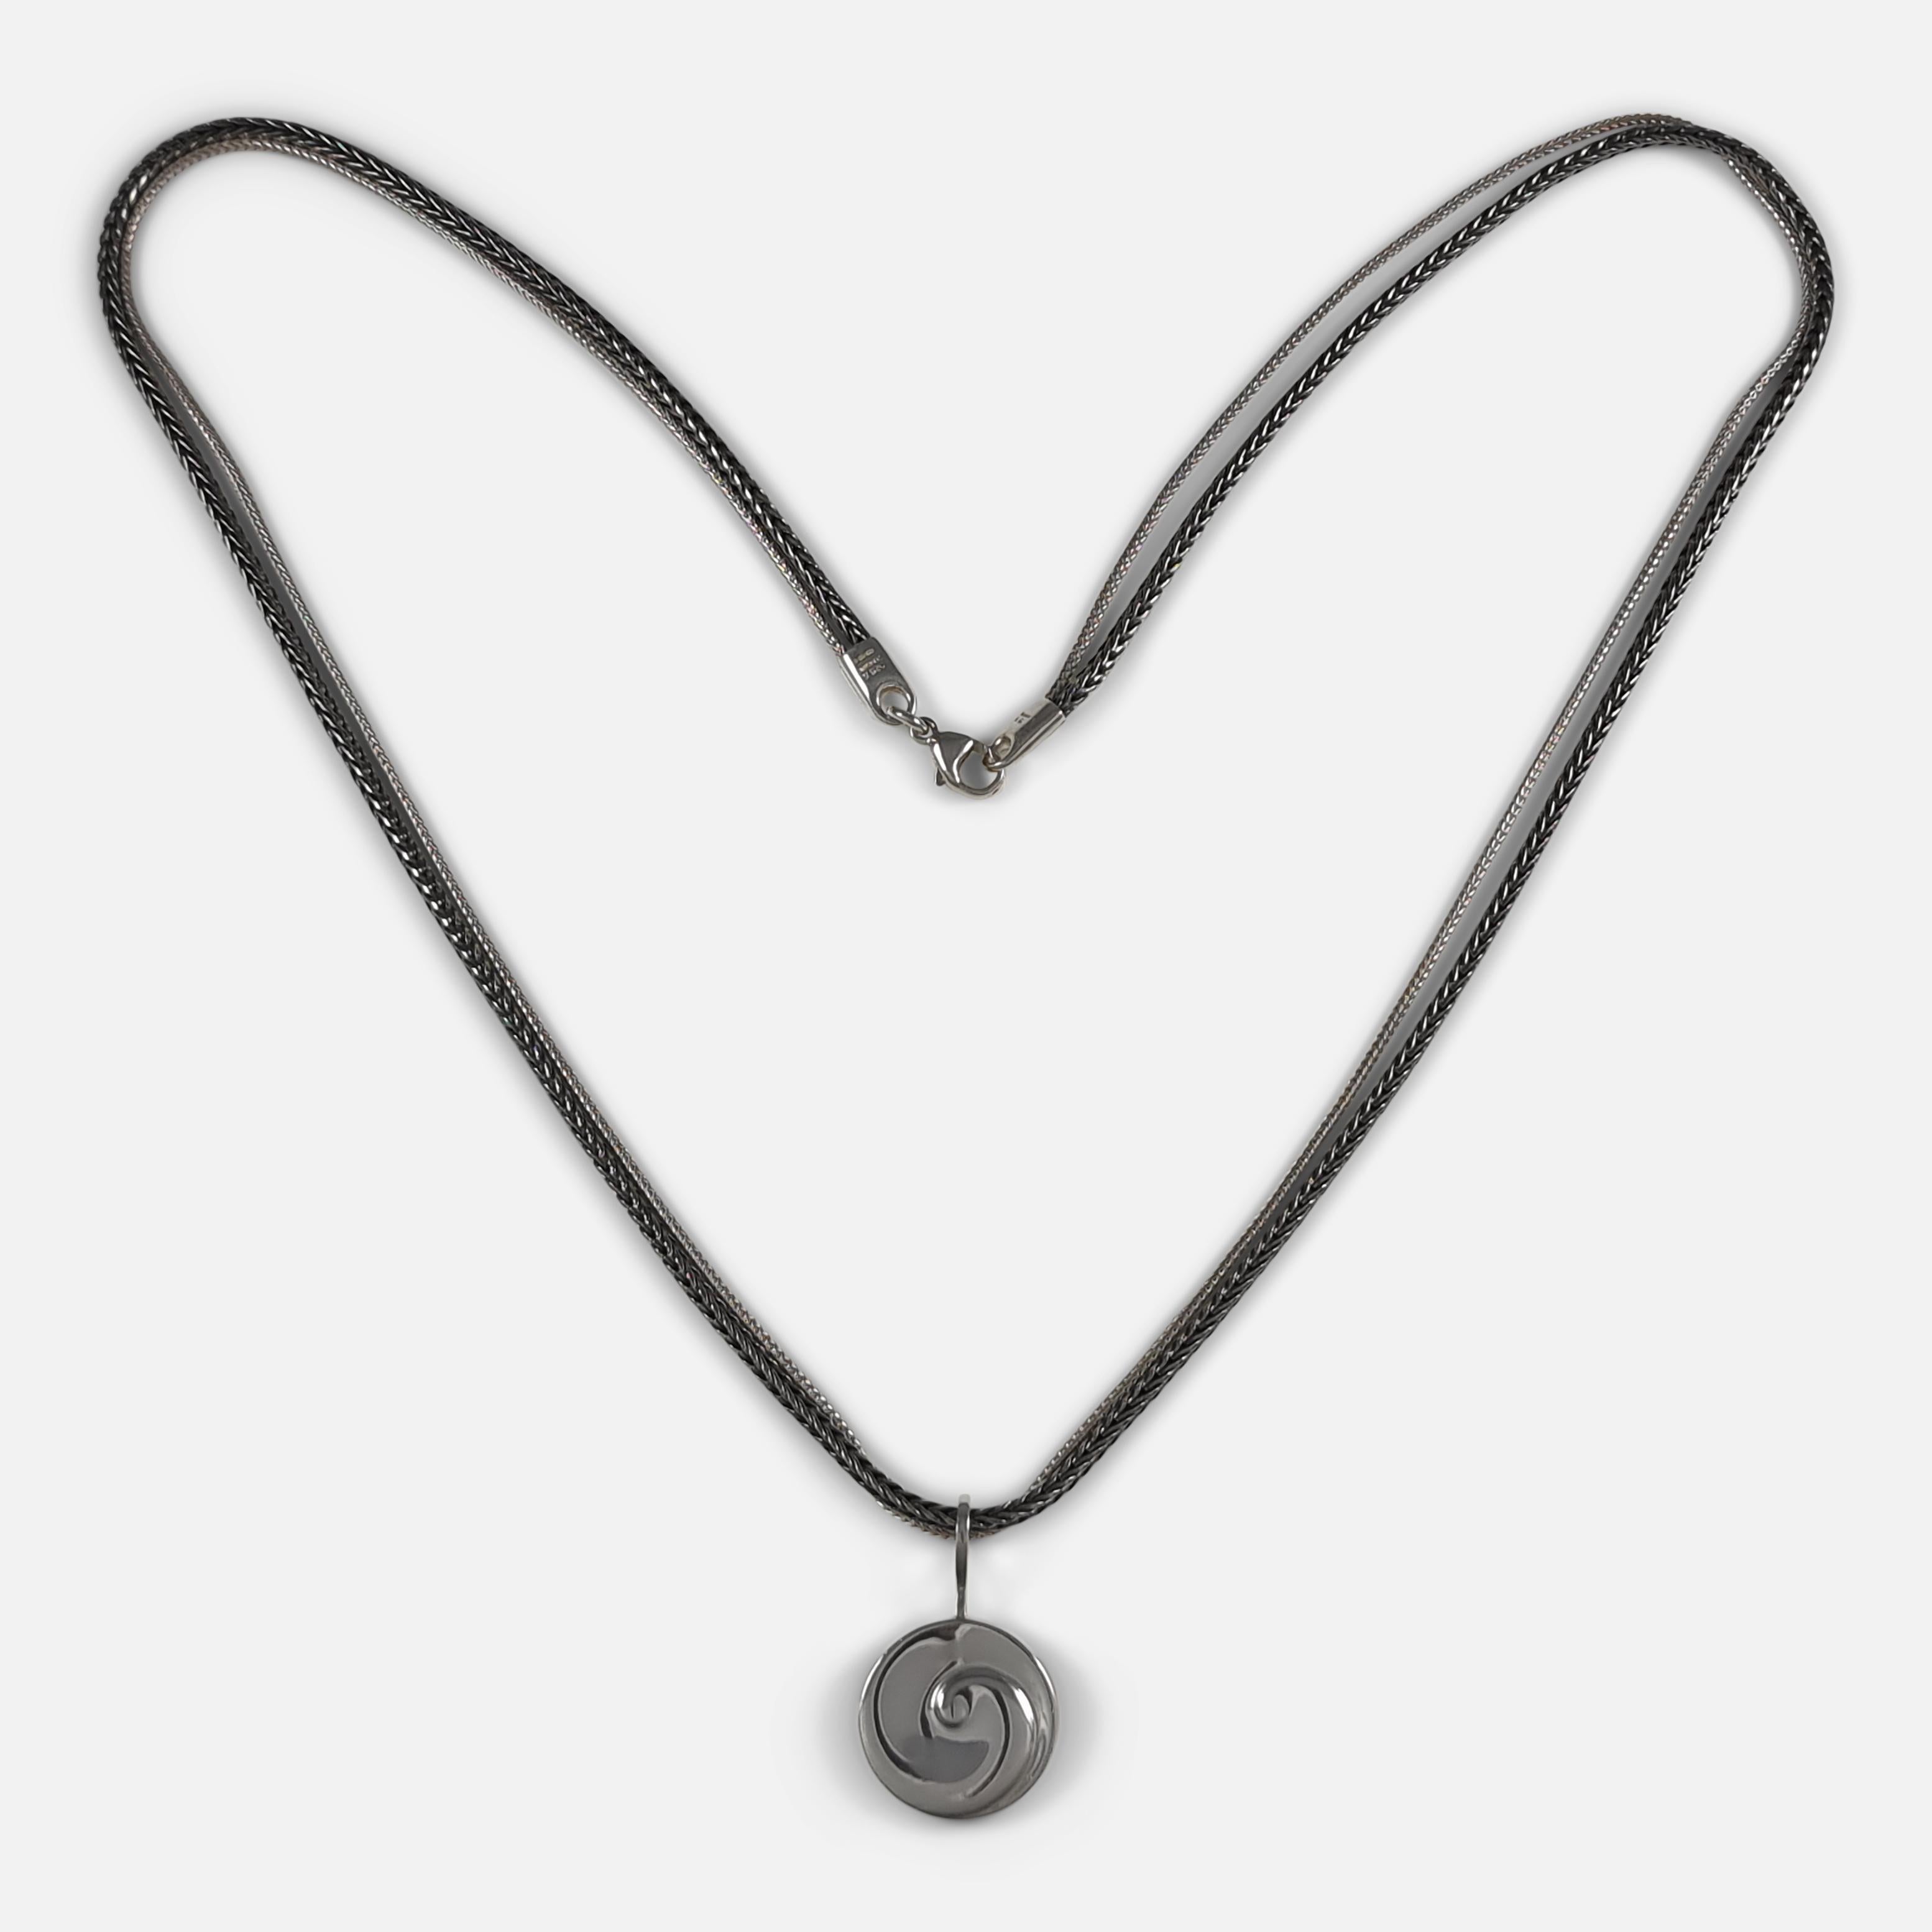 A sterling silver pendant #207, designed by Vivianna Torun Bülow-Hübe for Georg Jensen, with double strand chain. The pendant has a swirl effect to the front, on a double strand silver chain, with one strand being oxidised. 

The pendant is stamped